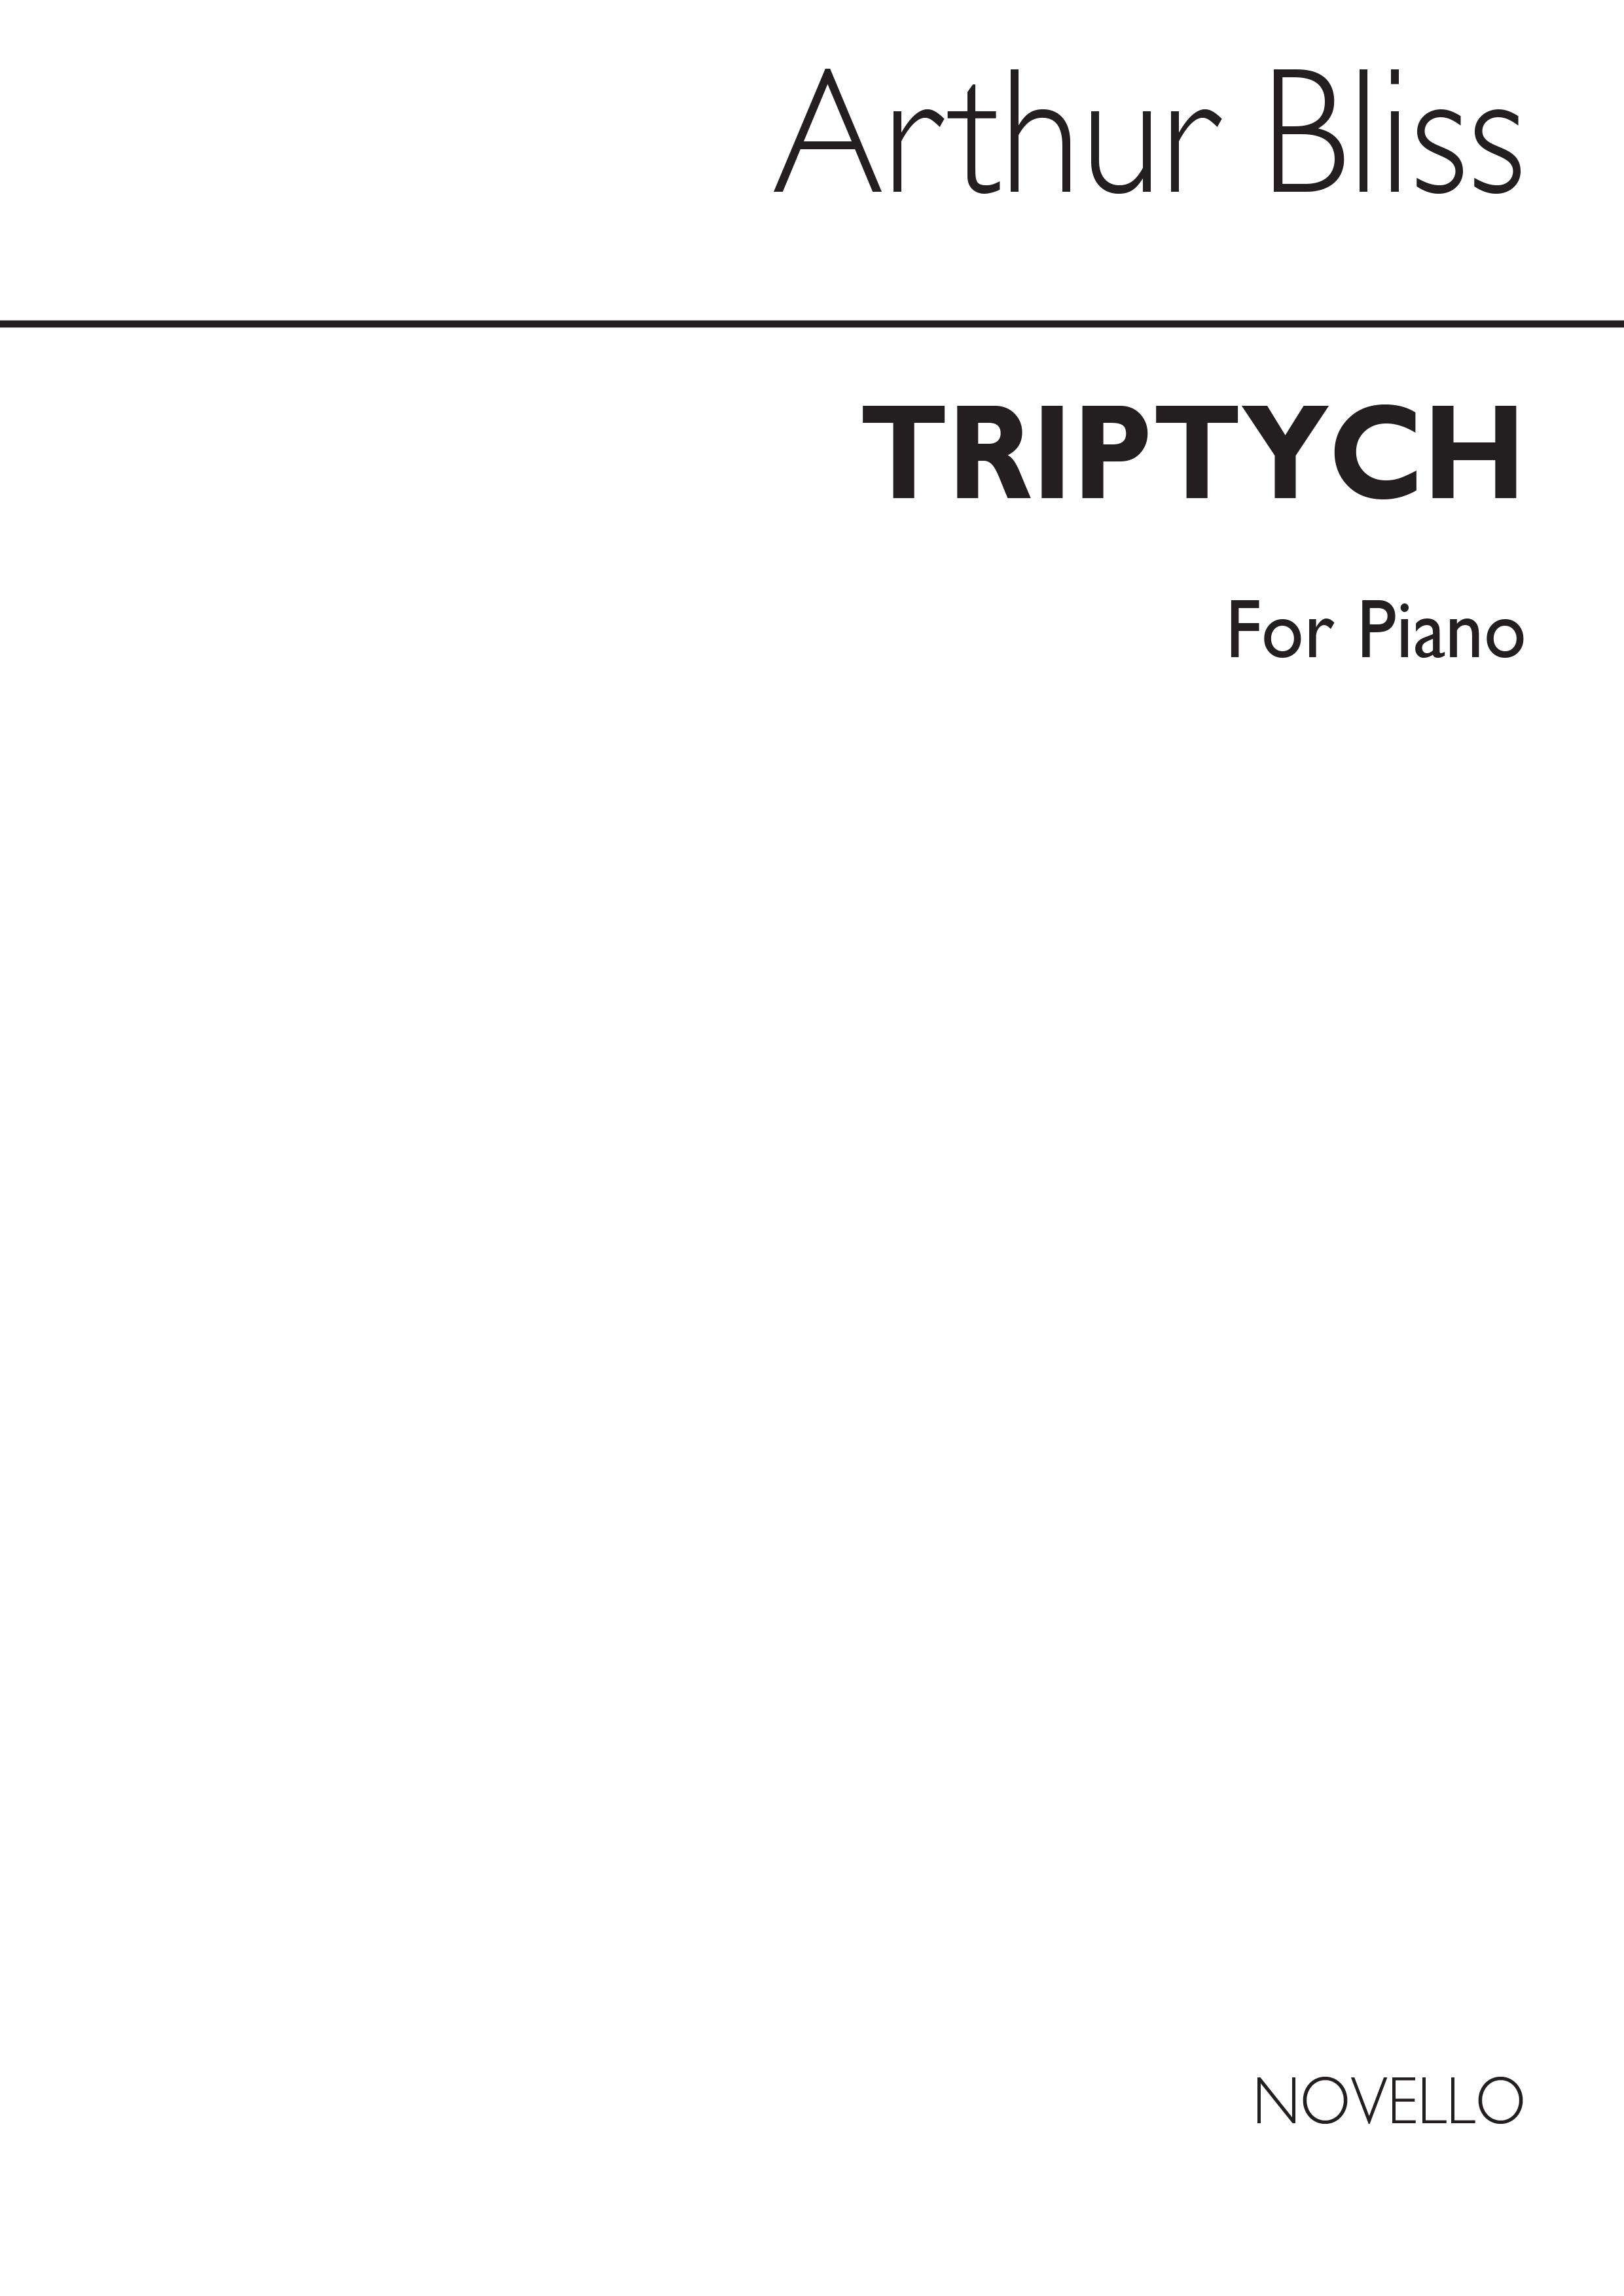 Bliss: Triptych for Piano